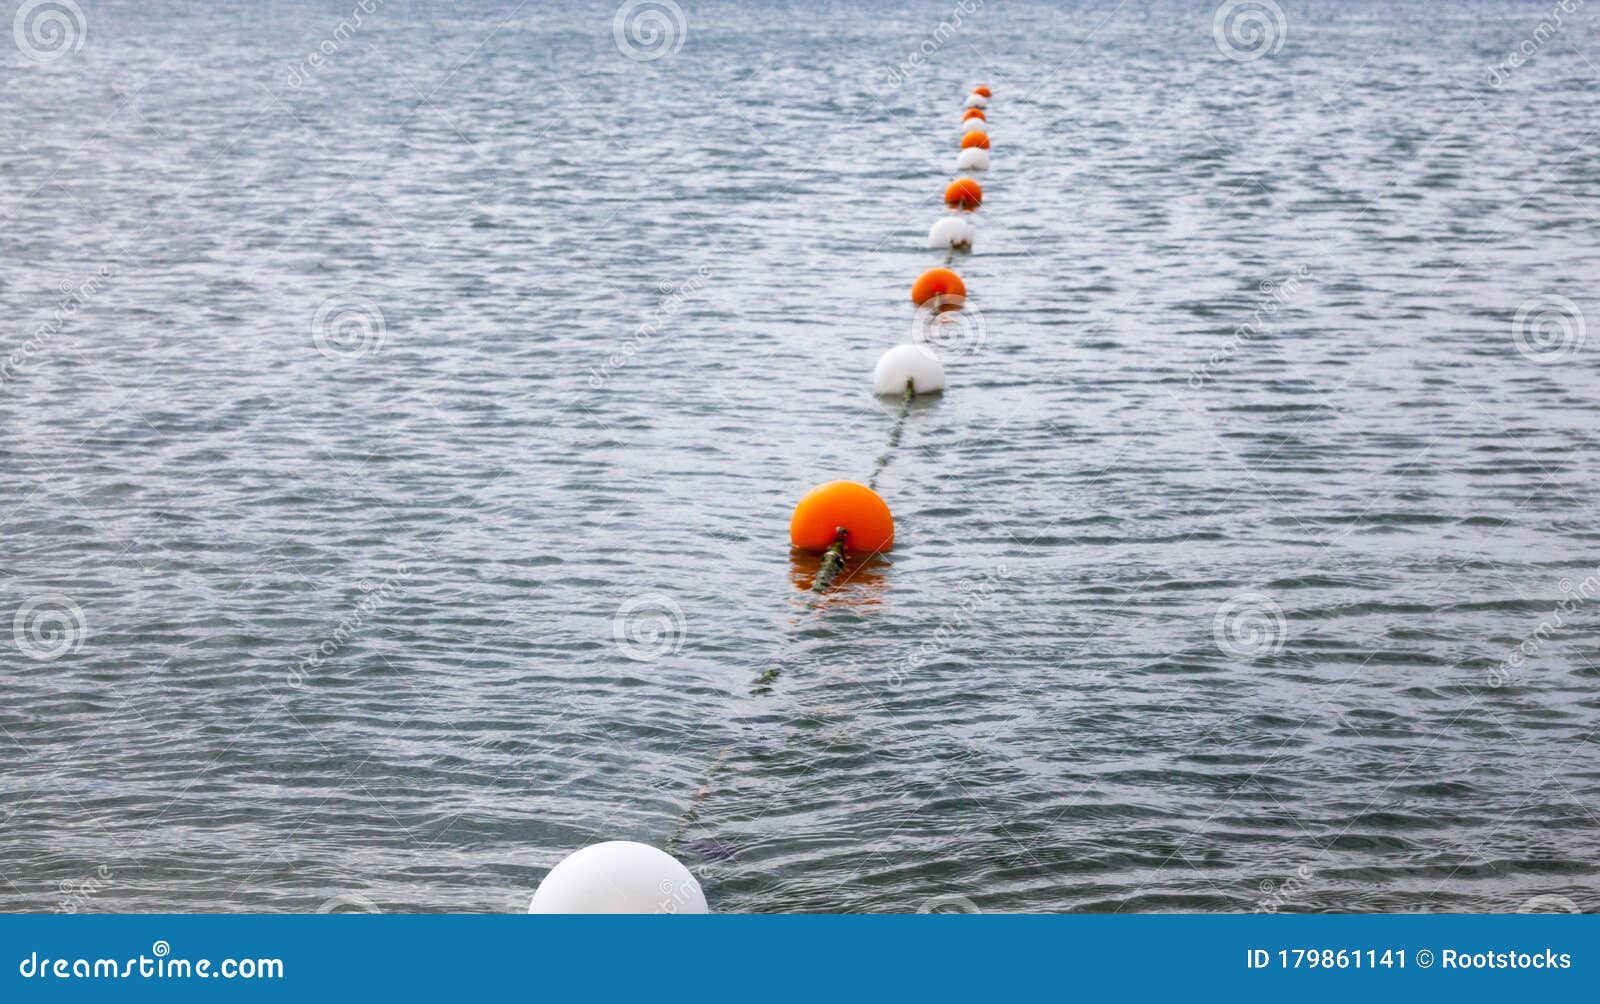 Safety Rope and Float Line in the Sea Stock Image - Image of ripples,  danger: 179861141